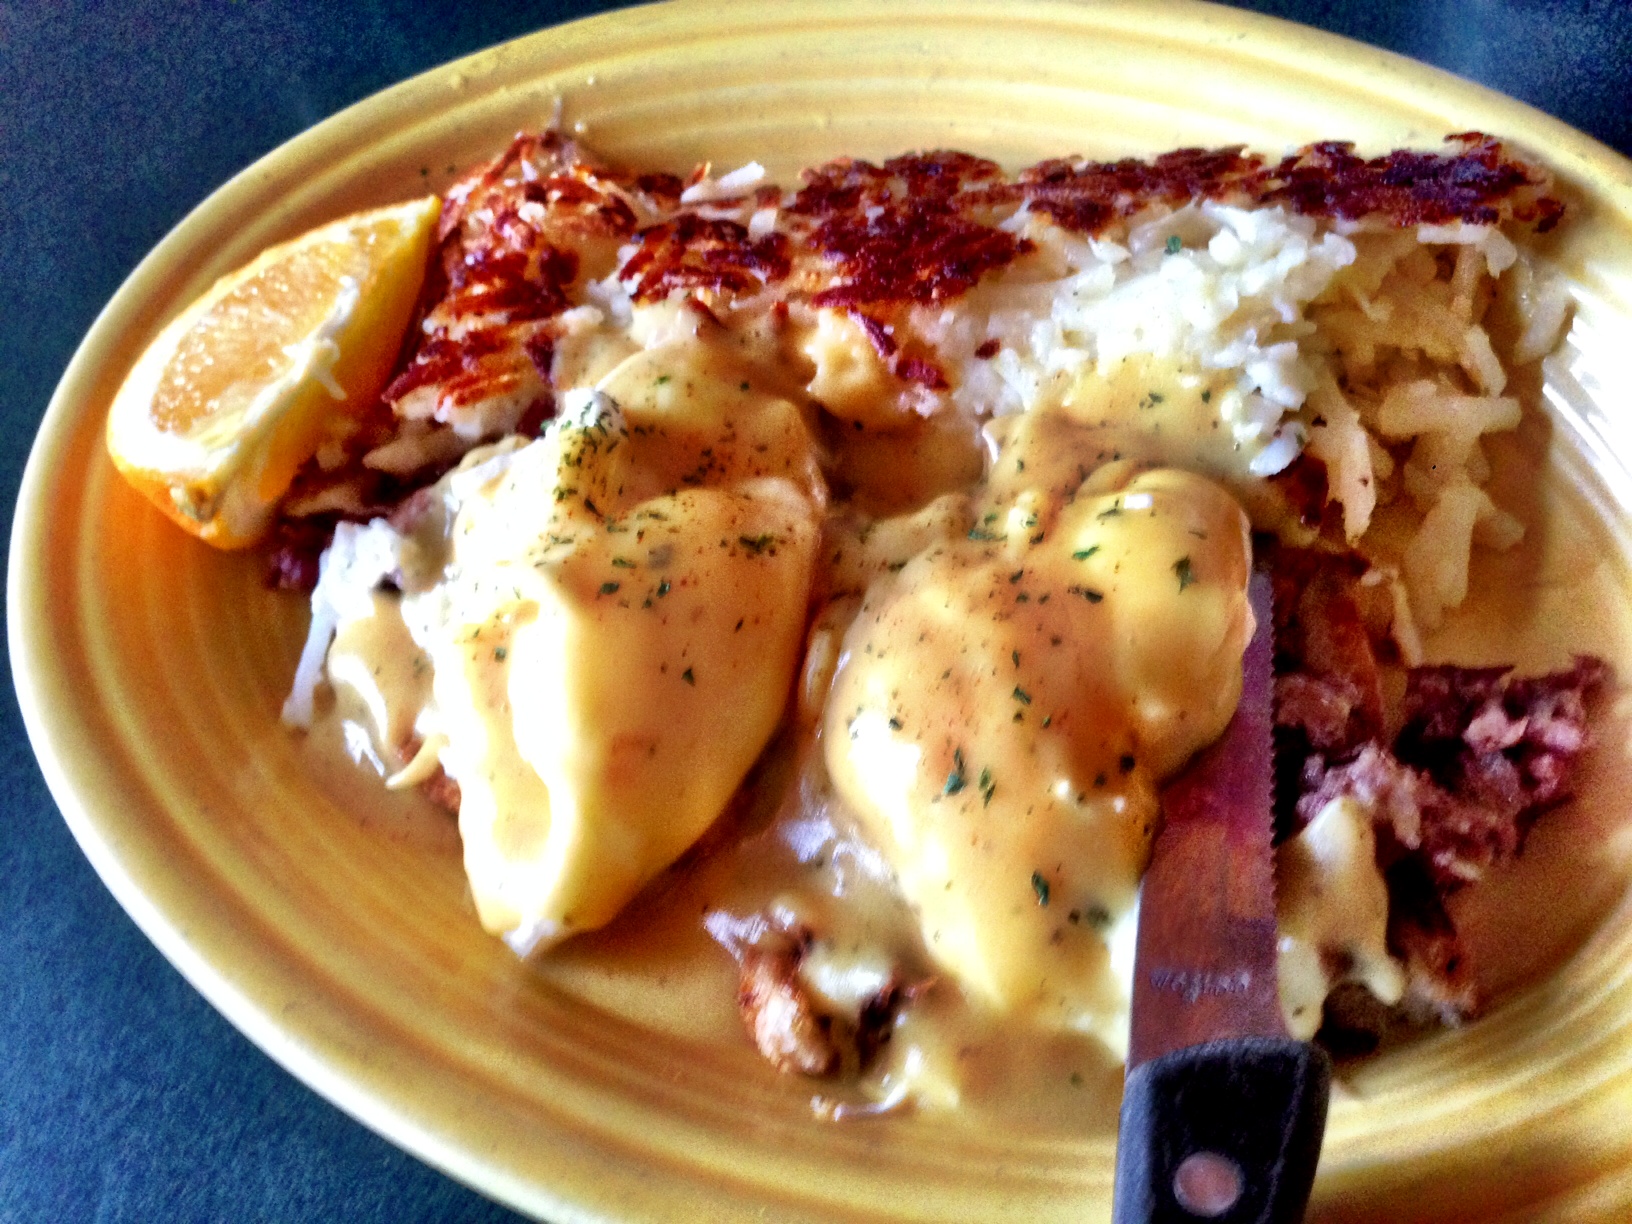 What could be better than slow braised corned beef hash on rustic rosemary toast with poached eggs and Hollandaise sauce on a blustery winter morning (with crispy hash brown potatoes of course!)?